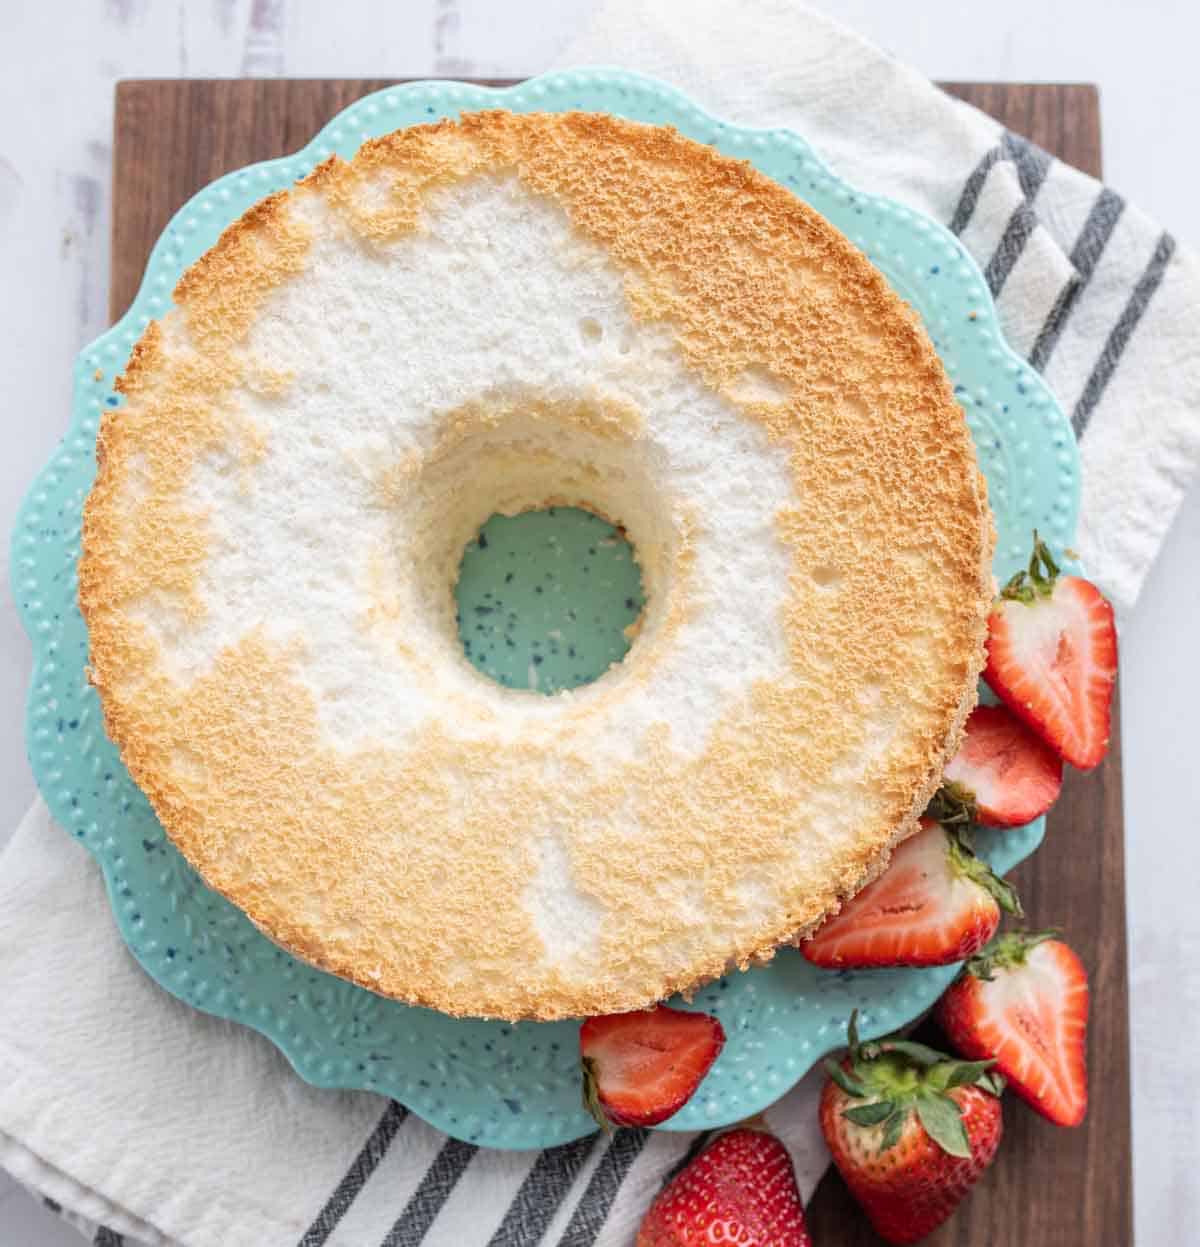 top view of the circled shaped angel food cake on a blue plate